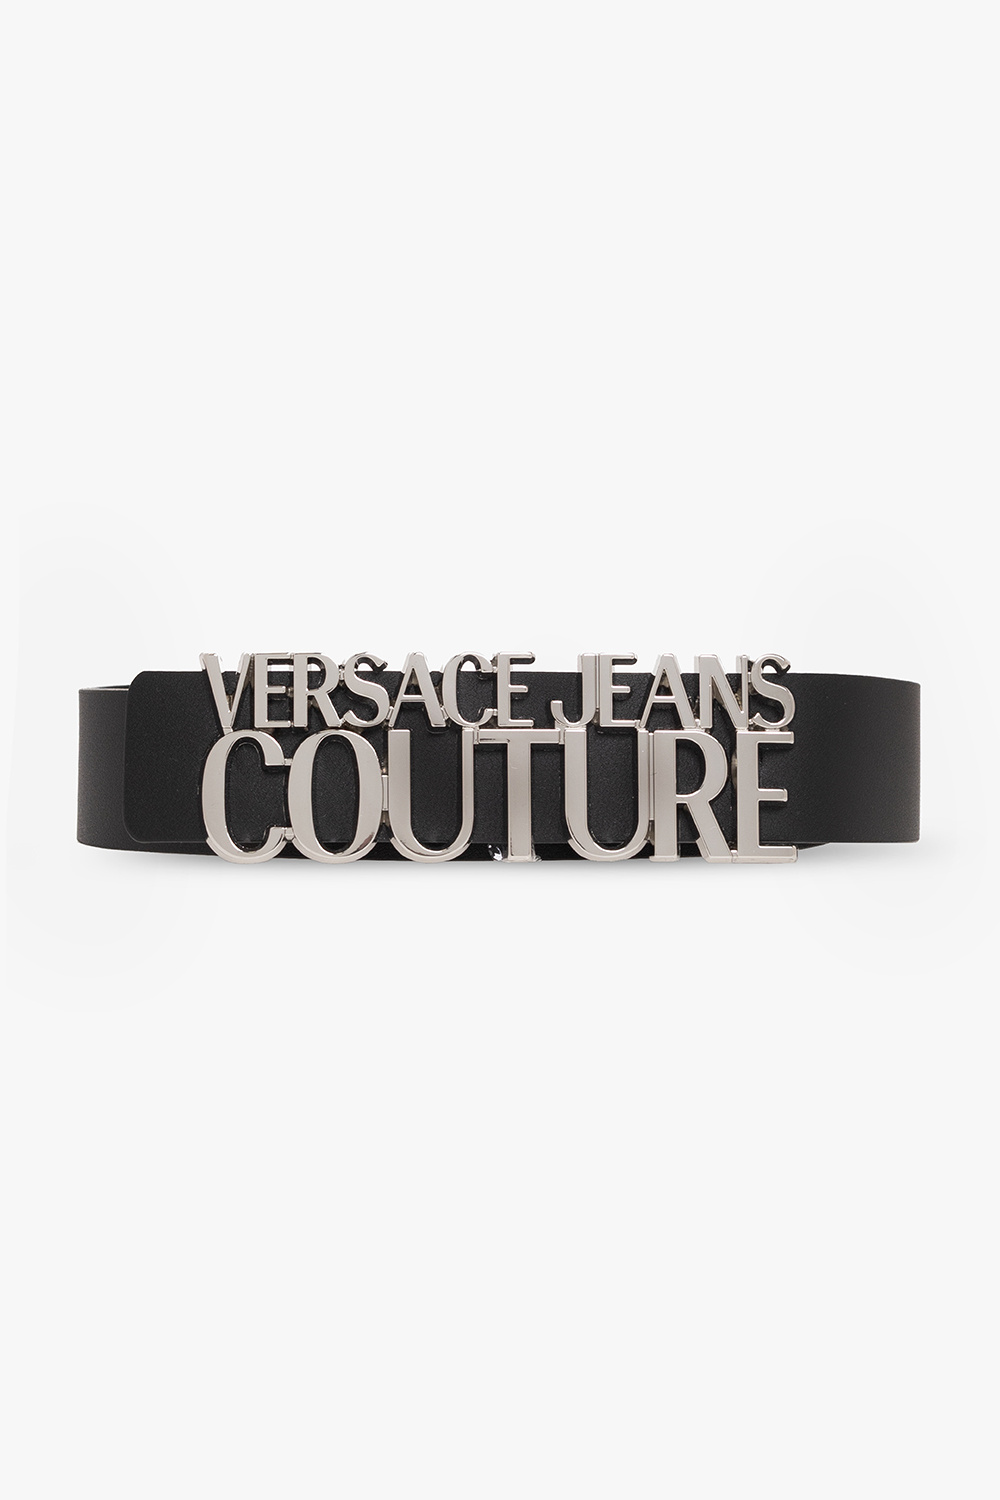 Versace Jeans Couture Clothing & Accessories